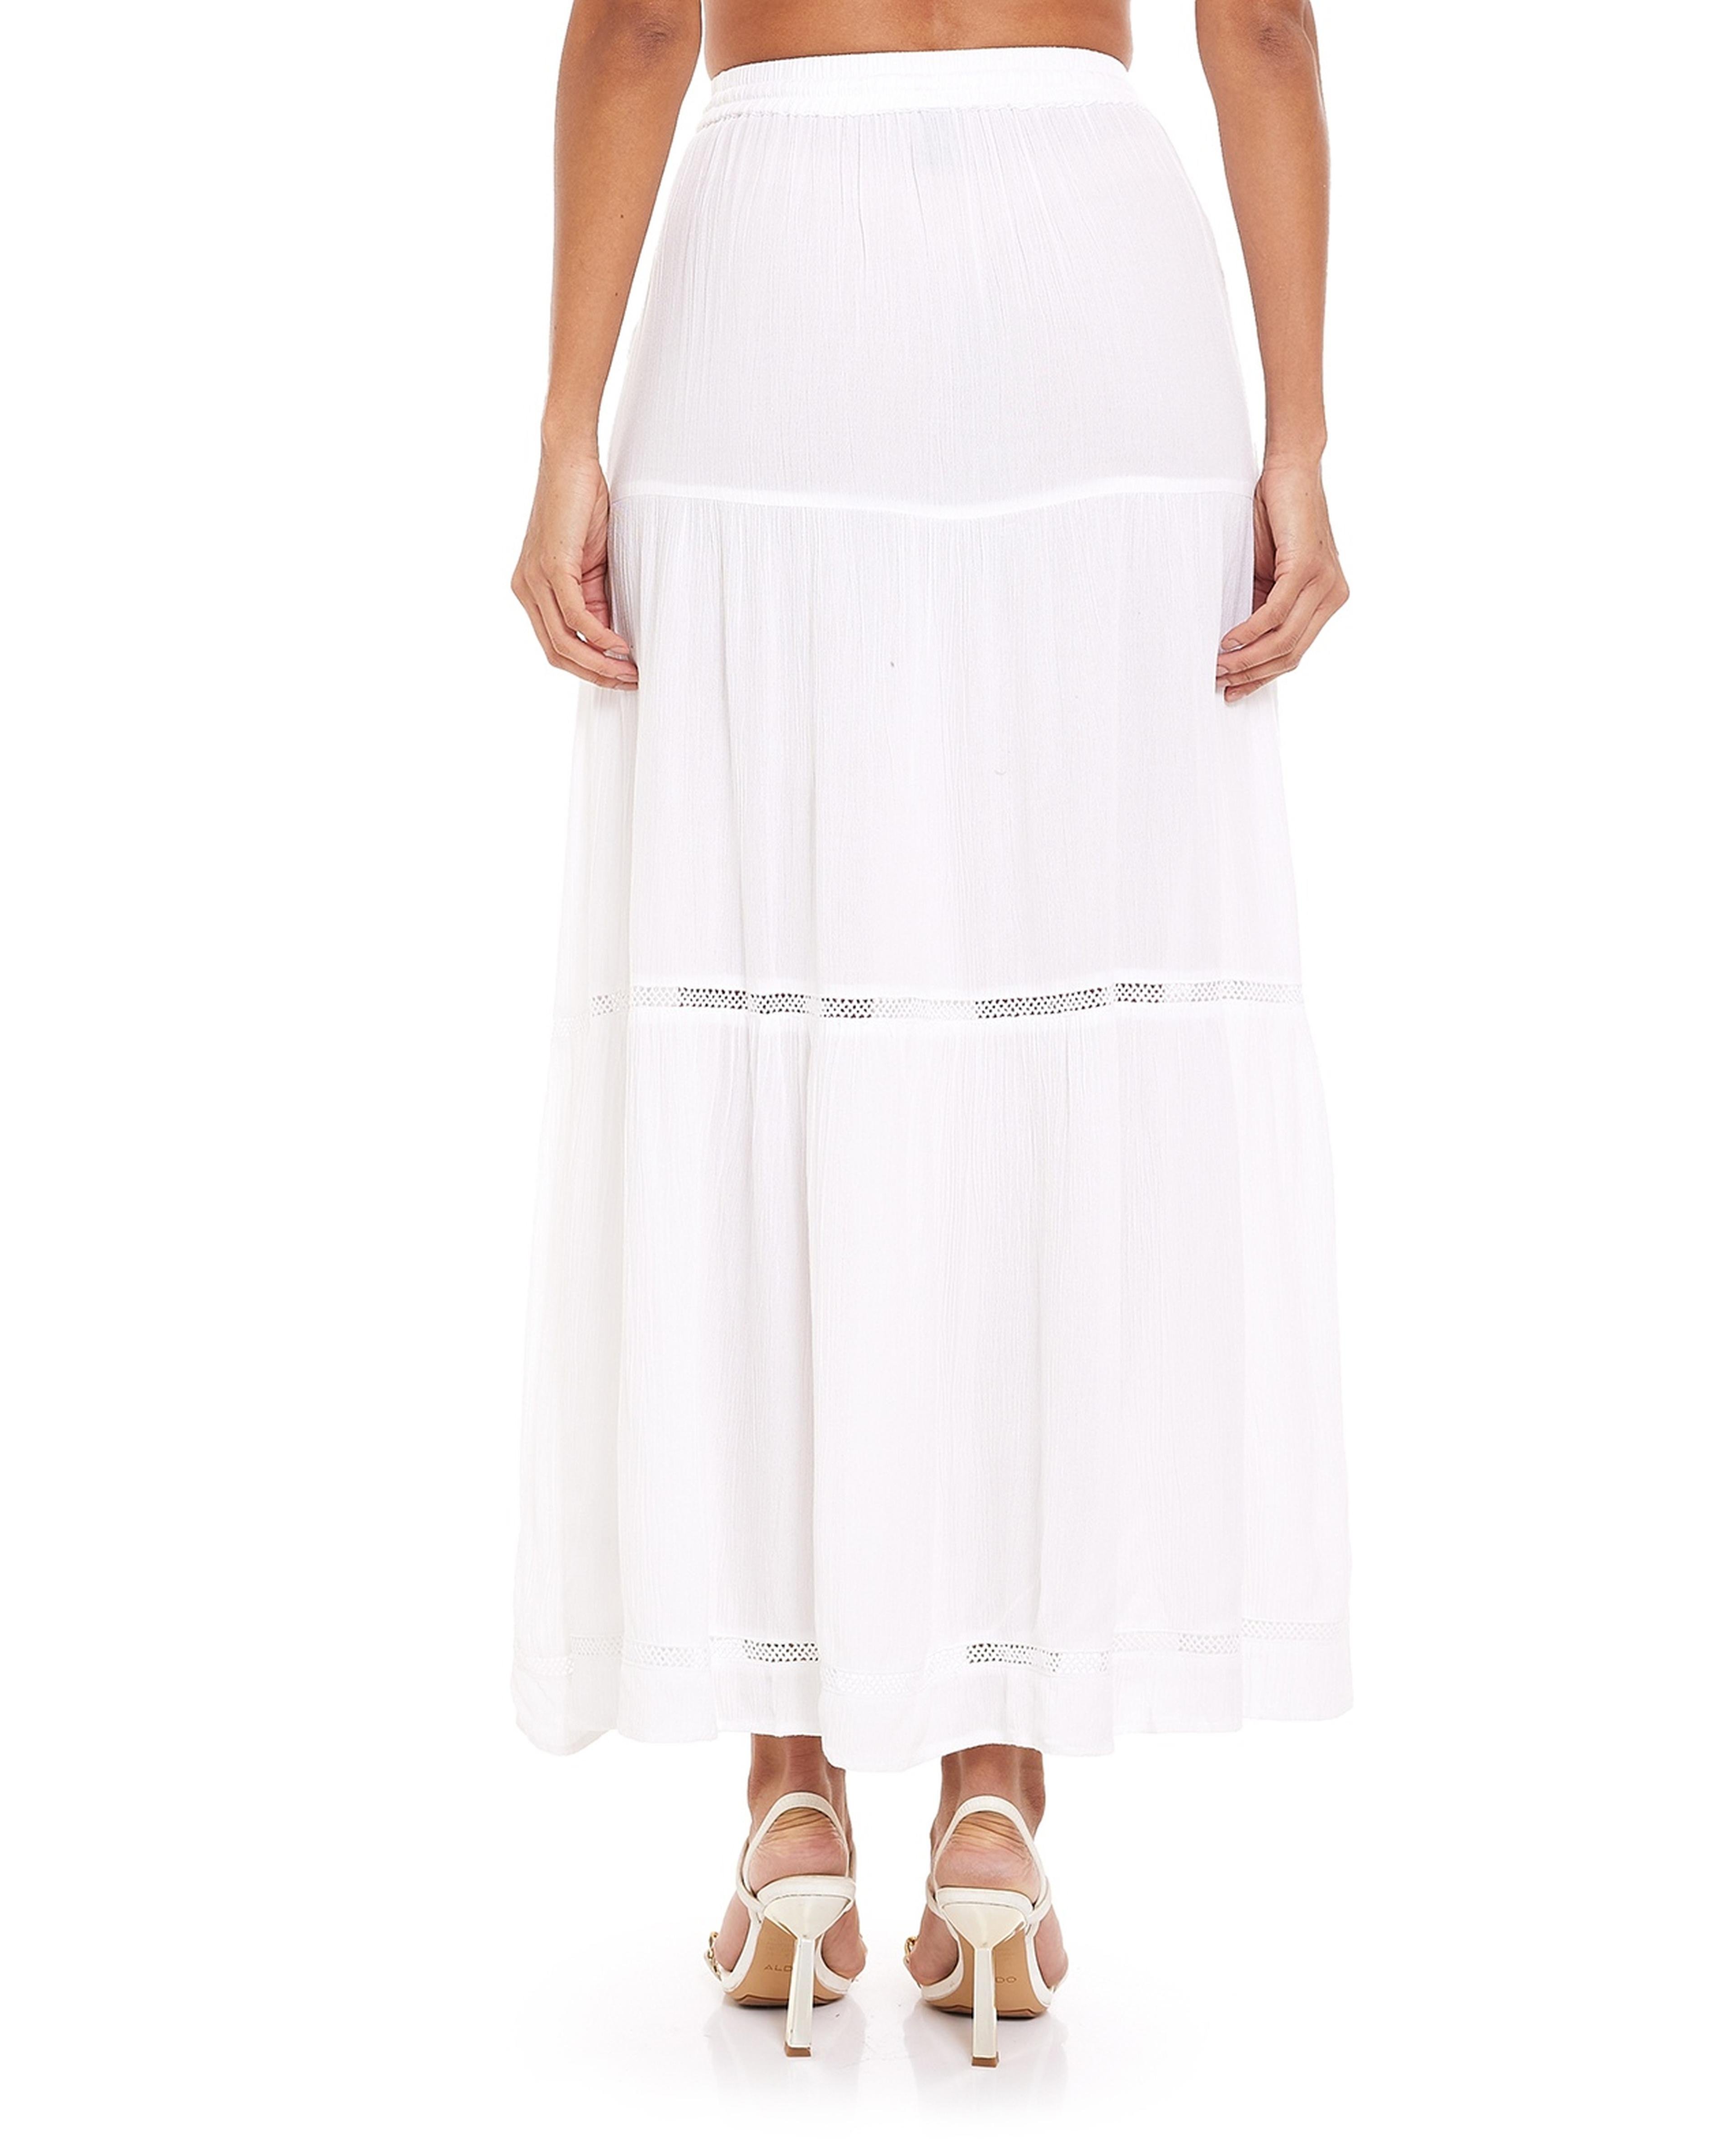 Solid Tiered Skirt with Drawstring Waist